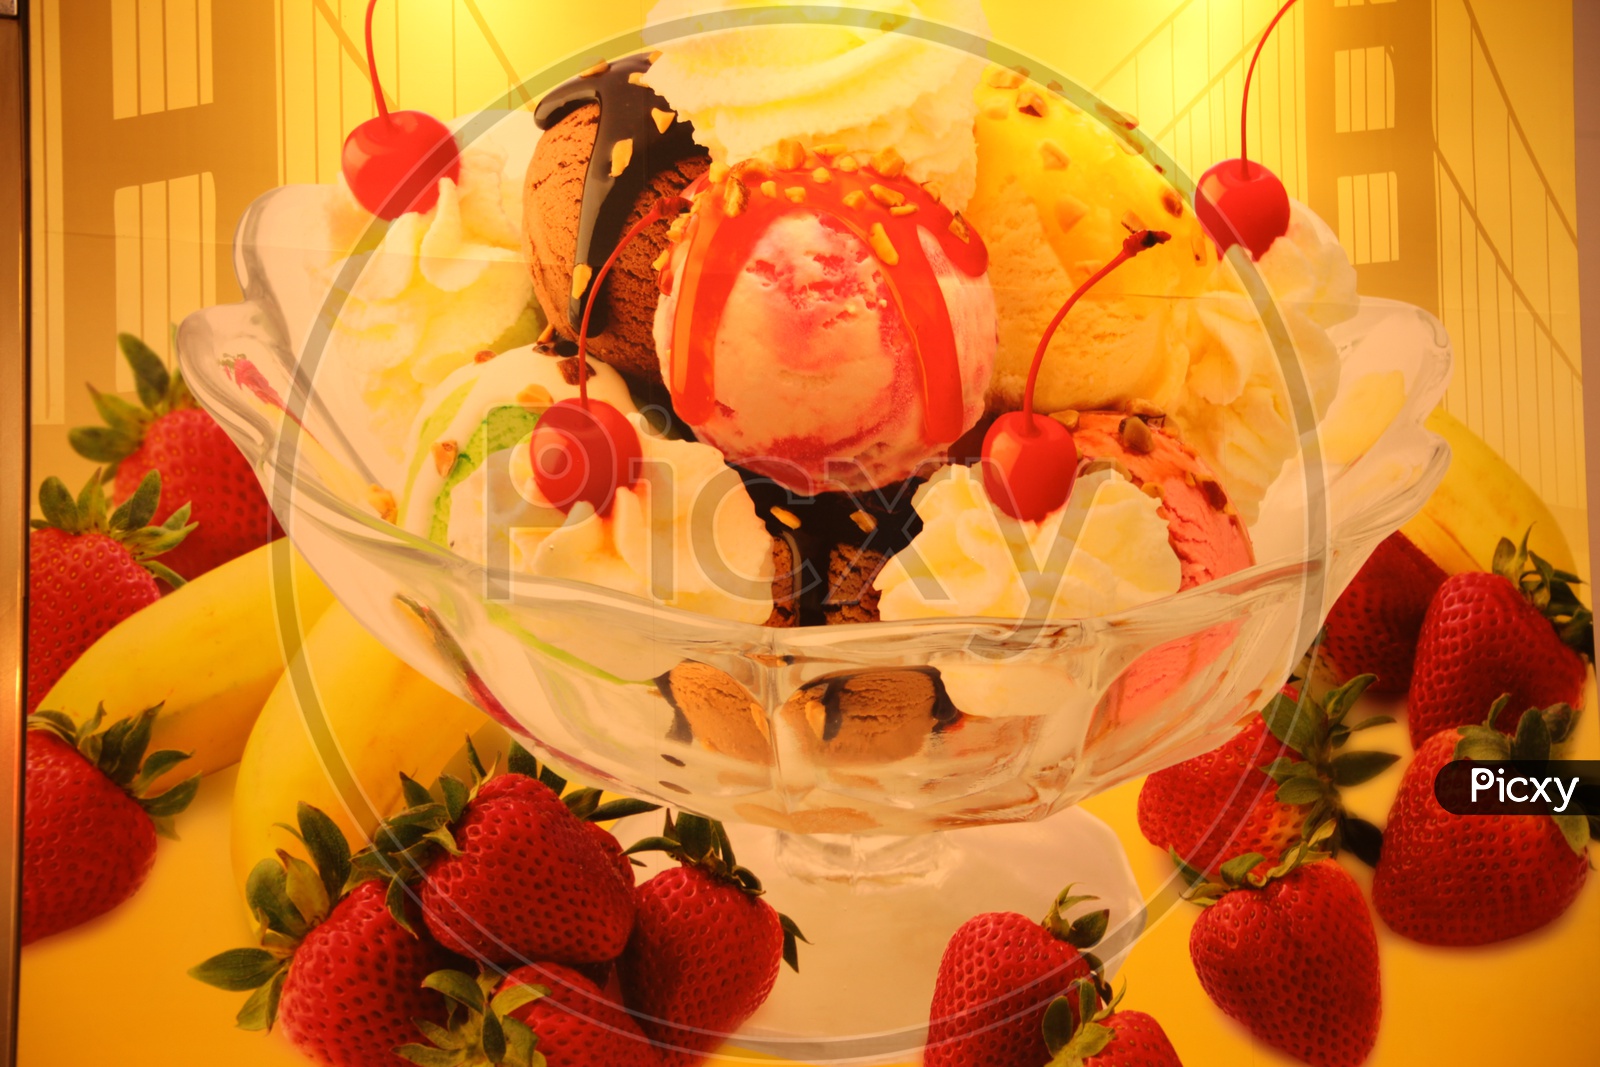 Ice cream scoops in a glass bowl topped with cherries and strawberries in the foreground